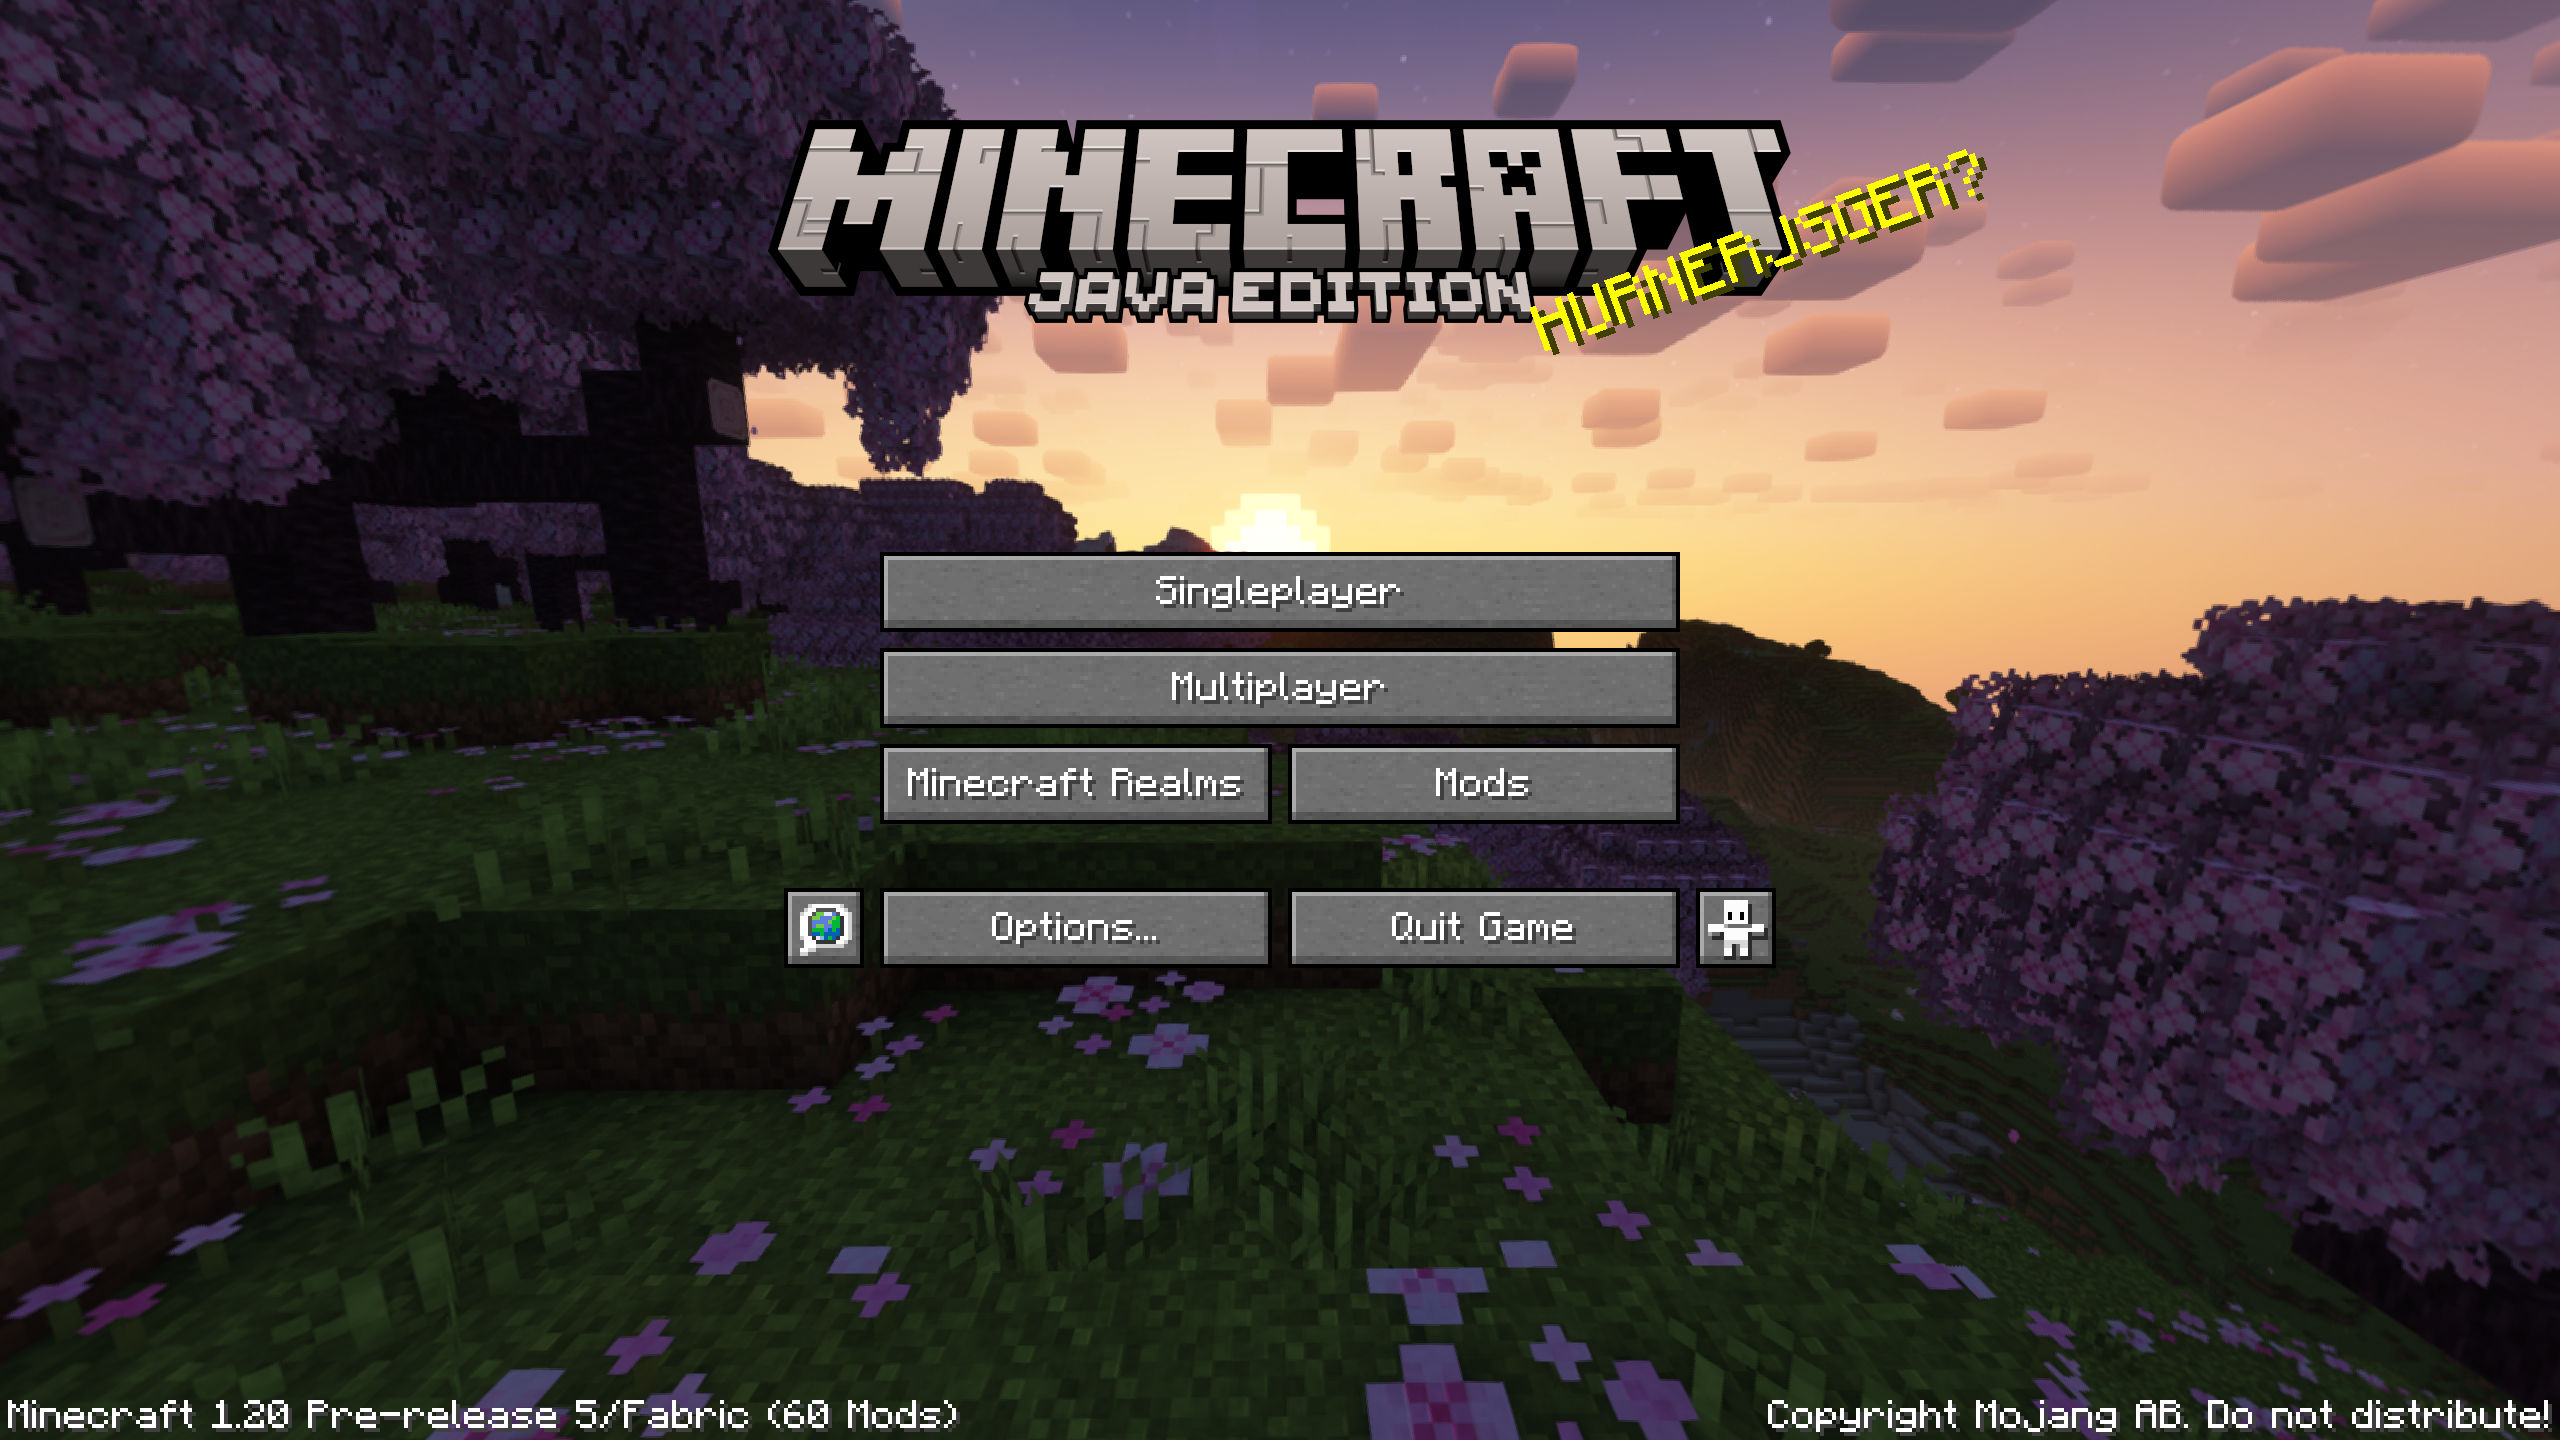 Title screen with shaders